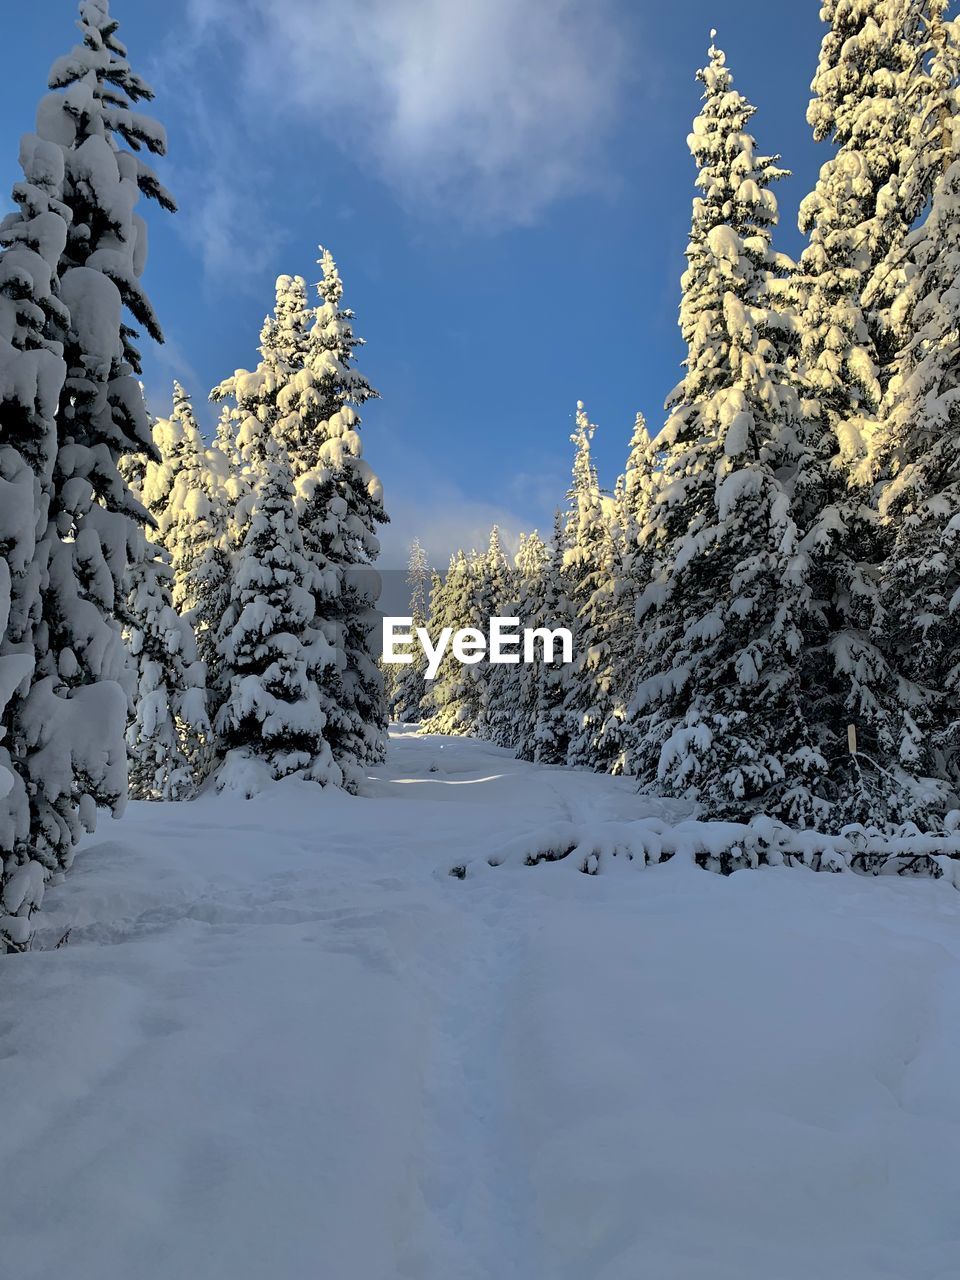 snow, cold temperature, winter, tree, plant, nature, coniferous tree, pine tree, sky, scenics - nature, beauty in nature, landscape, environment, pinaceae, forest, land, mountain range, mountain, pine woodland, frozen, tranquil scene, tranquility, cloud, non-urban scene, woodland, no people, spruce, blue, fir, white, evergreen tree, outdoors, polar climate, spruce tree, snowcapped mountain, fir tree, ice, freezing, day, travel destinations, idyllic, travel, frost, wilderness, remote, deep snow